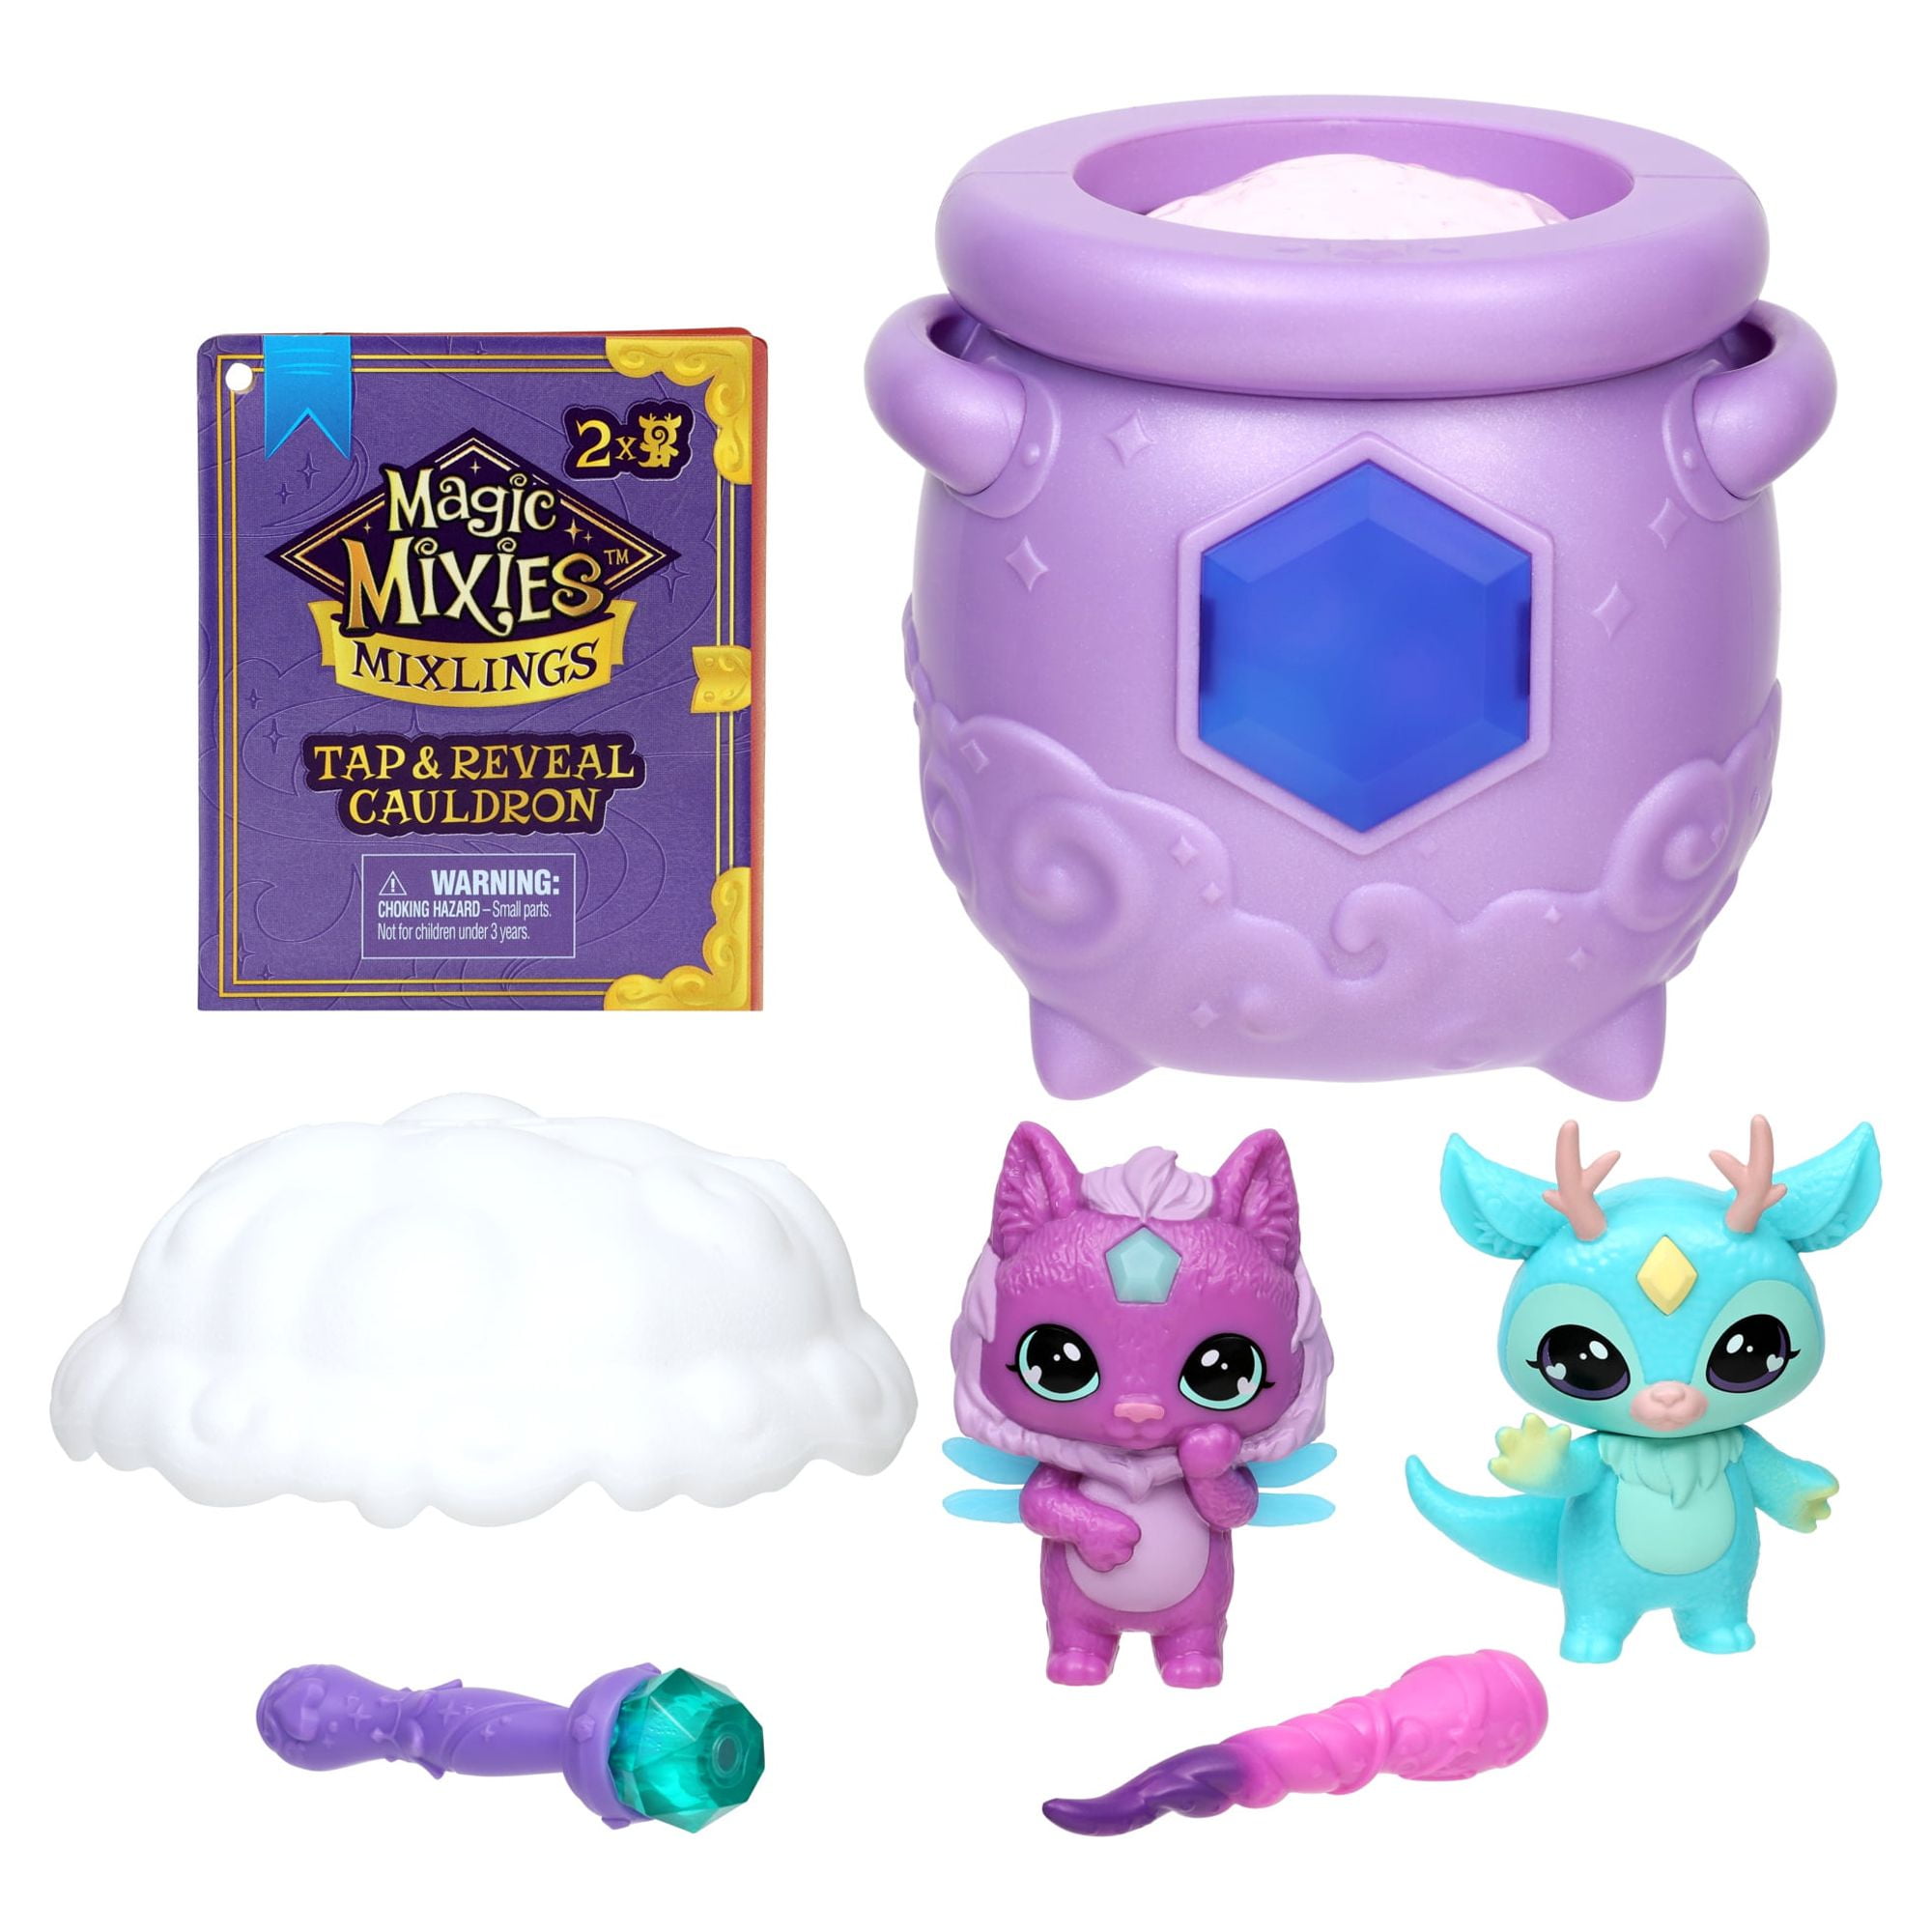 Magic mixies mixlings tap reveal cauldron pack magic wand reveals magic power and surprise reveal on cauldron colors and styles may vary toys for kids aged and up